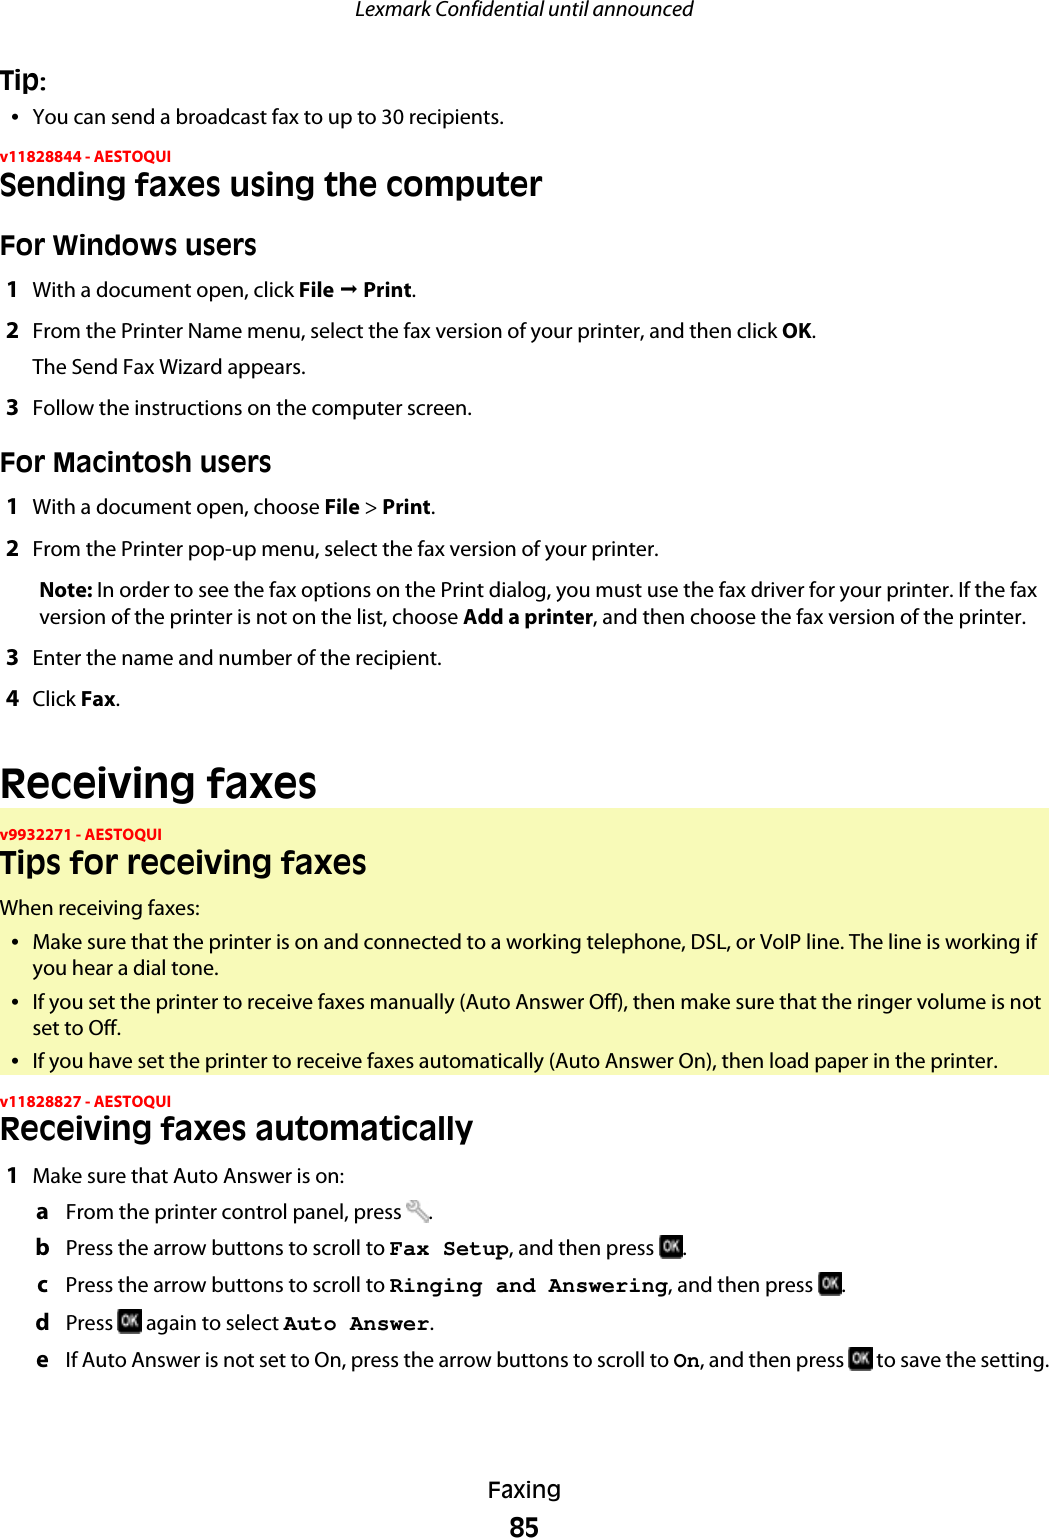 Tip:•You can send a broadcast fax to up to 30 recipients.v11828844 - AESTOQUISending faxes using the computerFor Windows users1With a document open, click File ª Print.2From the Printer Name menu, select the fax version of your printer, and then click OK.The Send Fax Wizard appears.3Follow the instructions on the computer screen.For Macintosh users1With a document open, choose File &gt; Print.2From the Printer pop-up menu, select the fax version of your printer.Note: In order to see the fax options on the Print dialog, you must use the fax driver for your printer. If the faxversion of the printer is not on the list, choose Add a printer, and then choose the fax version of the printer.3Enter the name and number of the recipient.4Click Fax.Receiving faxesv9932271 - AESTOQUITips for receiving faxesWhen receiving faxes:•Make sure that the printer is on and connected to a working telephone, DSL, or VoIP line. The line is working ifyou hear a dial tone.•If you set the printer to receive faxes manually (Auto Answer Off), then make sure that the ringer volume is notset to Off.•If you have set the printer to receive faxes automatically (Auto Answer On), then load paper in the printer.v11828827 - AESTOQUIReceiving faxes automatically1Make sure that Auto Answer is on:aFrom the printer control panel, press  .bPress the arrow buttons to scroll to Fax Setup, and then press  .cPress the arrow buttons to scroll to Ringing and Answering, and then press  .dPress   again to select Auto Answer.eIf Auto Answer is not set to On, press the arrow buttons to scroll to On, and then press   to save the setting.Lexmark Confidential until announcedFaxing85